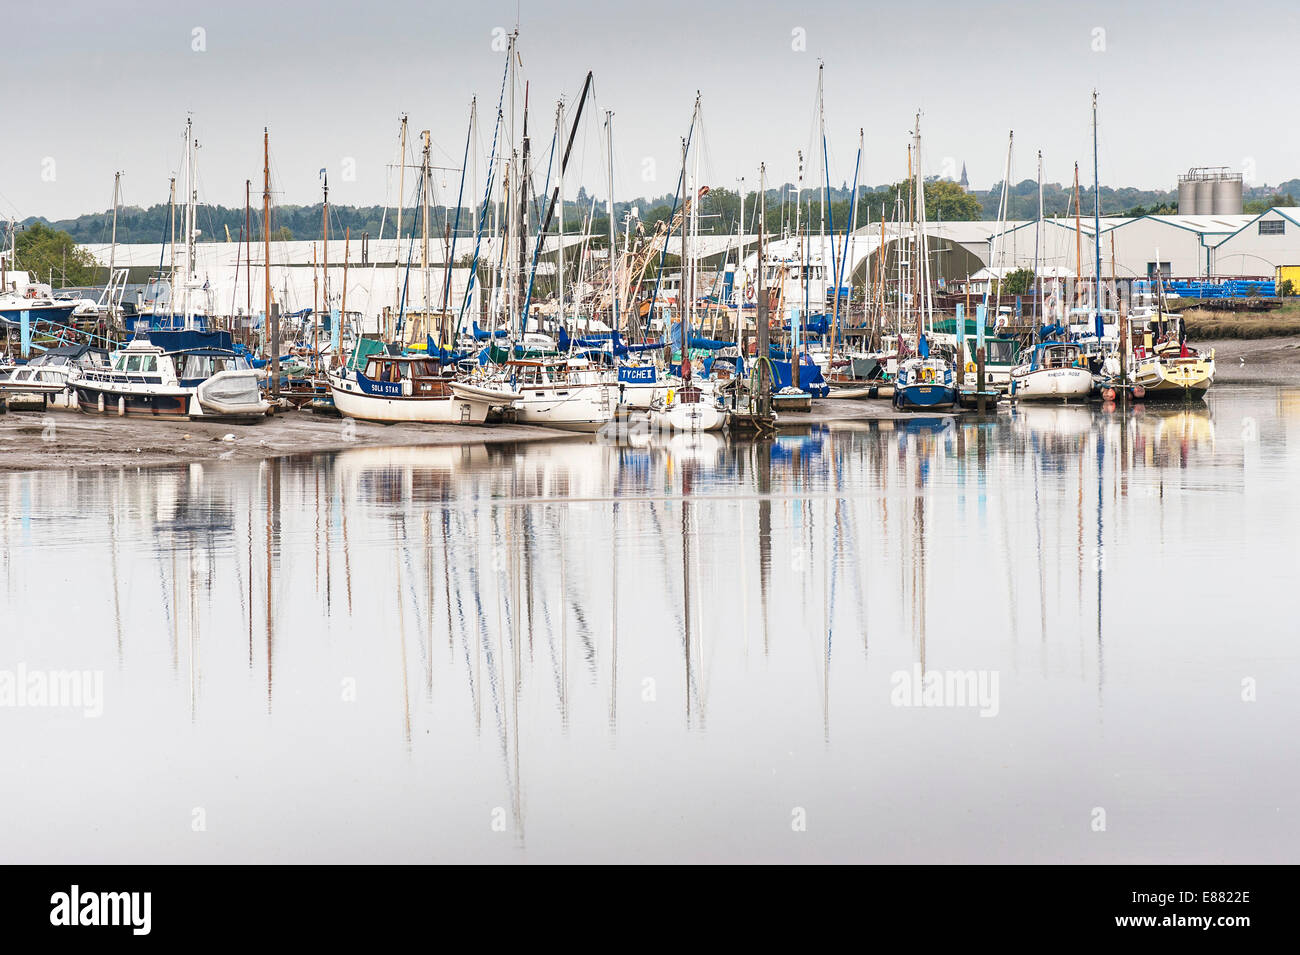 Boats moored on the Blackwater River at Maldon in Essex. Stock Photo